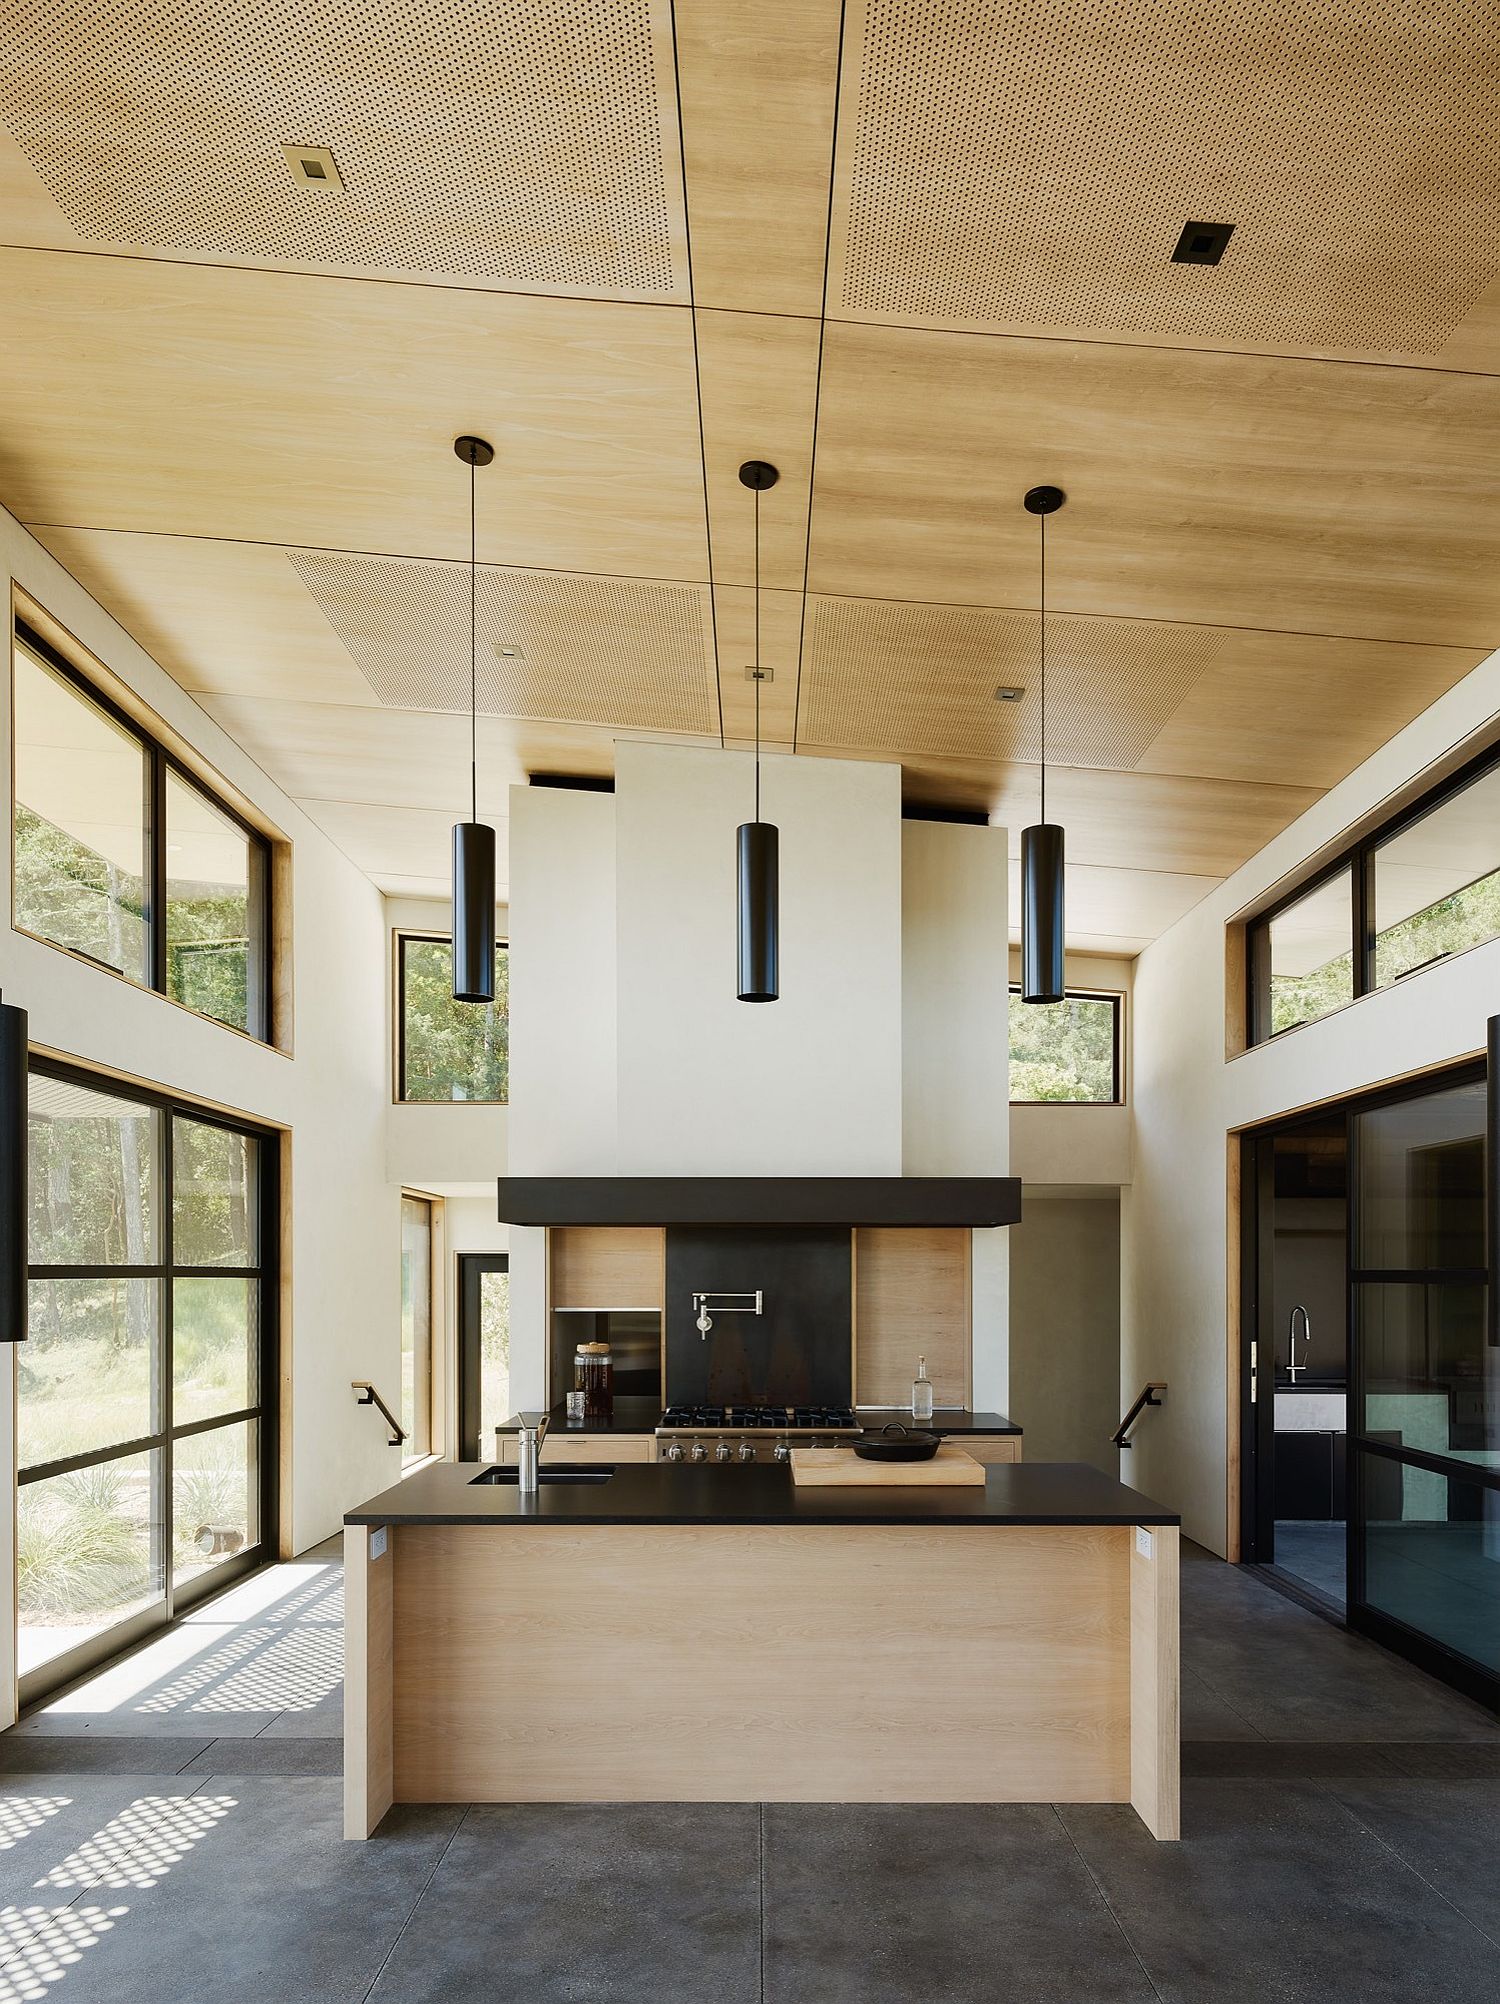 Trio of pendants adds to the charm of the kitchen with high ceiling